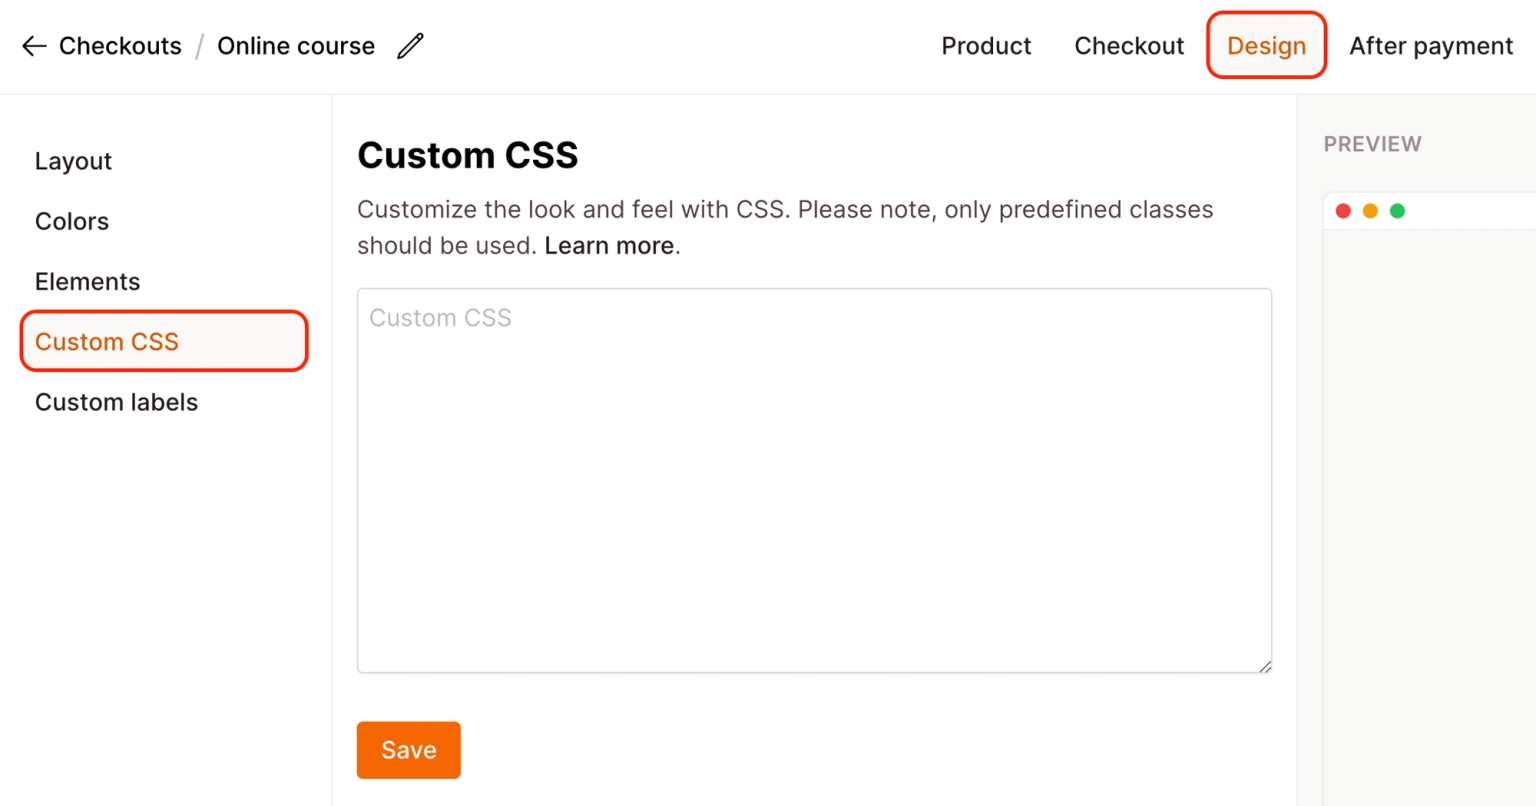 Checkout editor view for the Custom CSS section